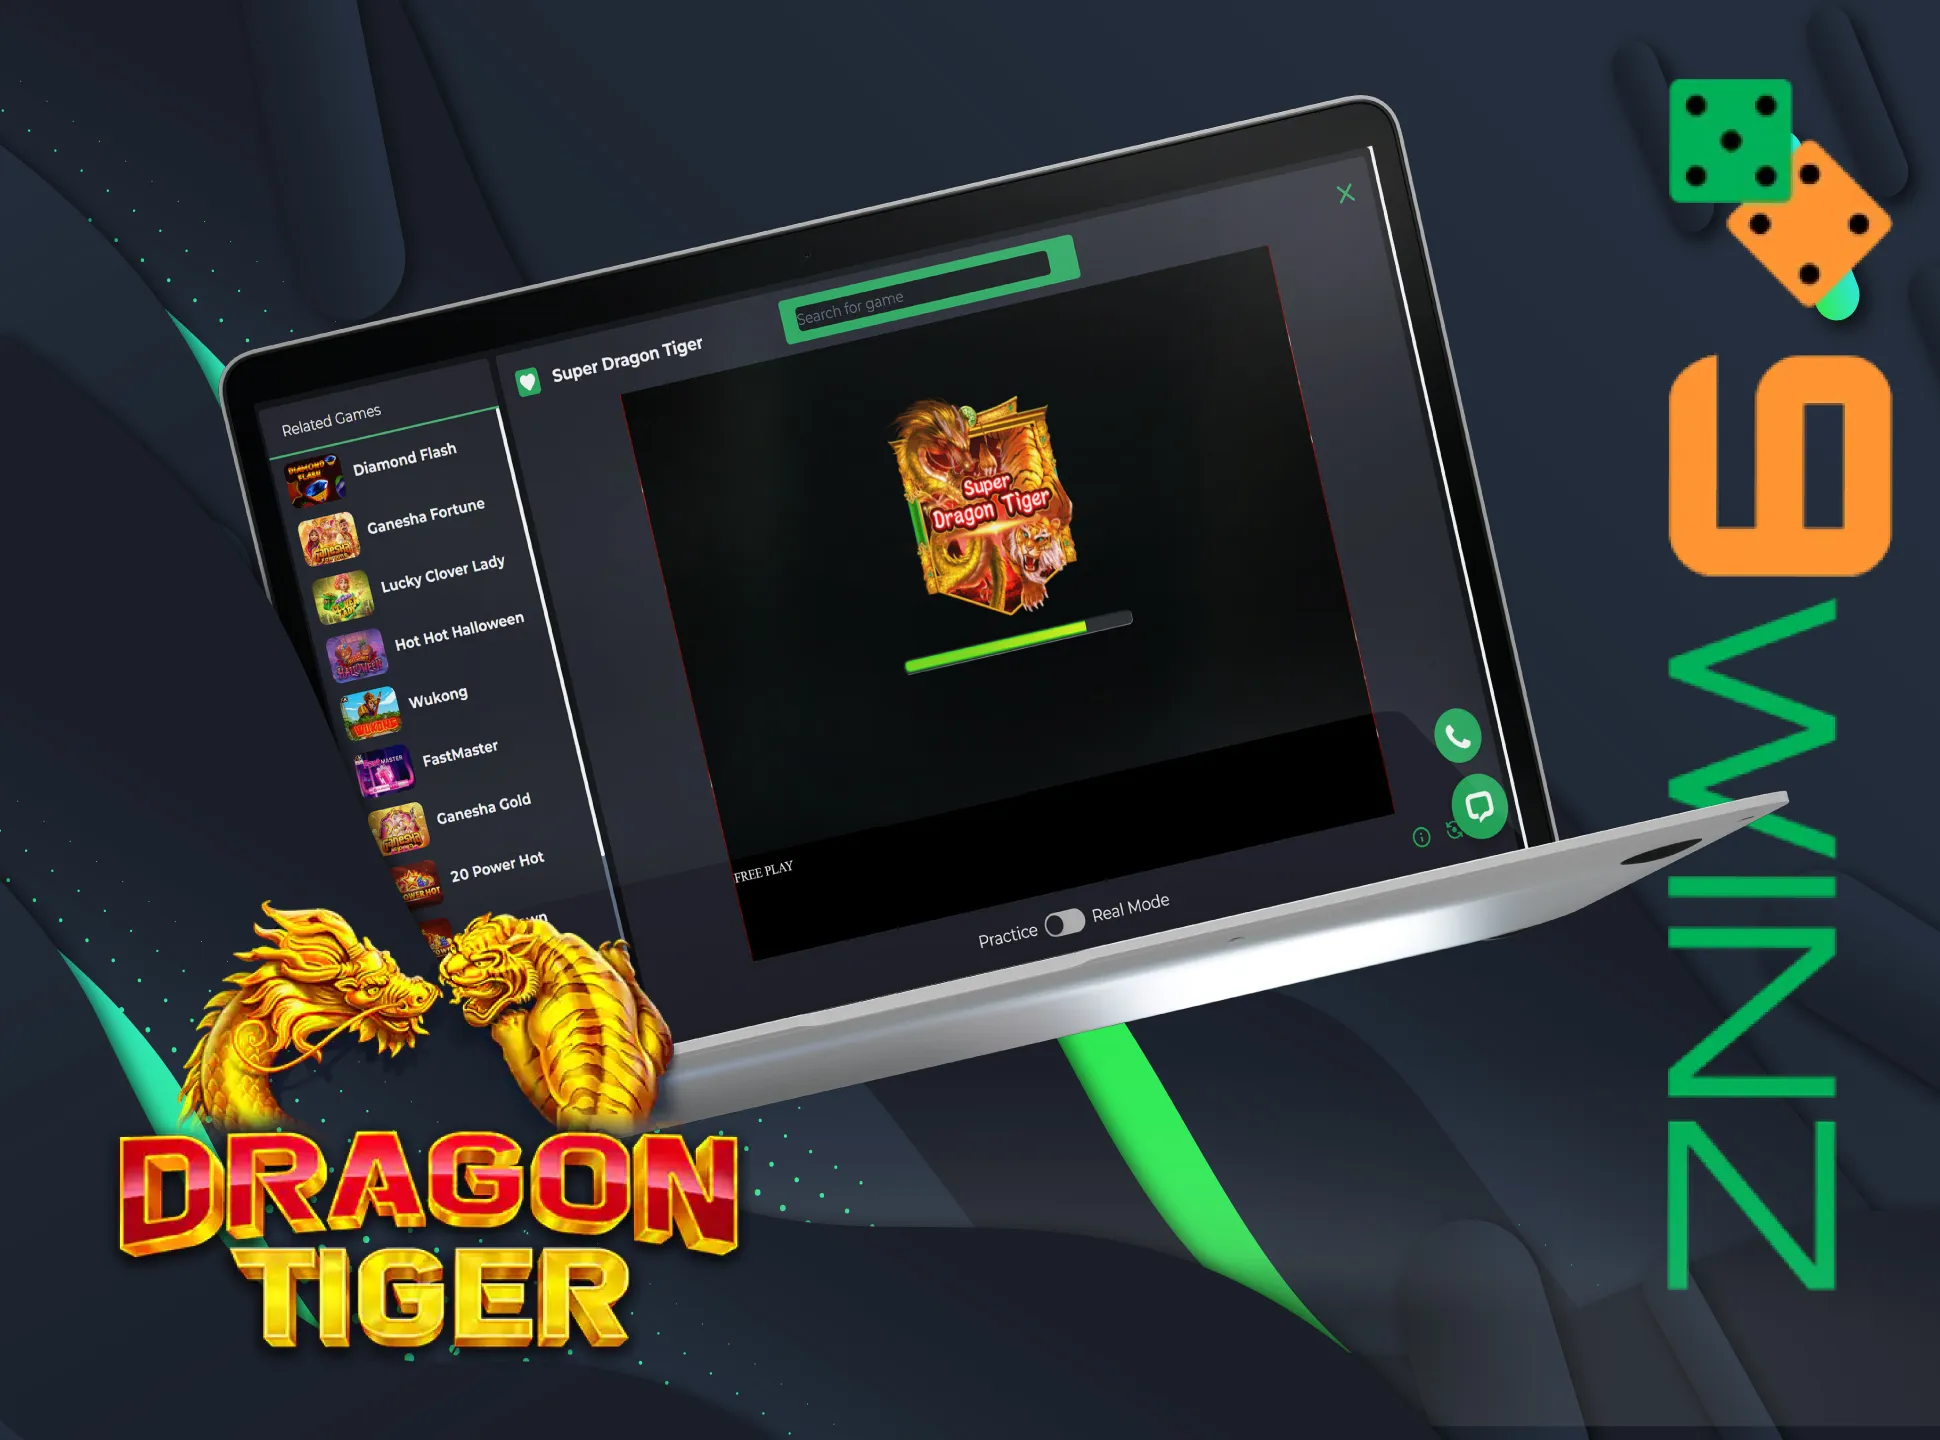 With 9Winz, find out what the game Dragon Tiger is.